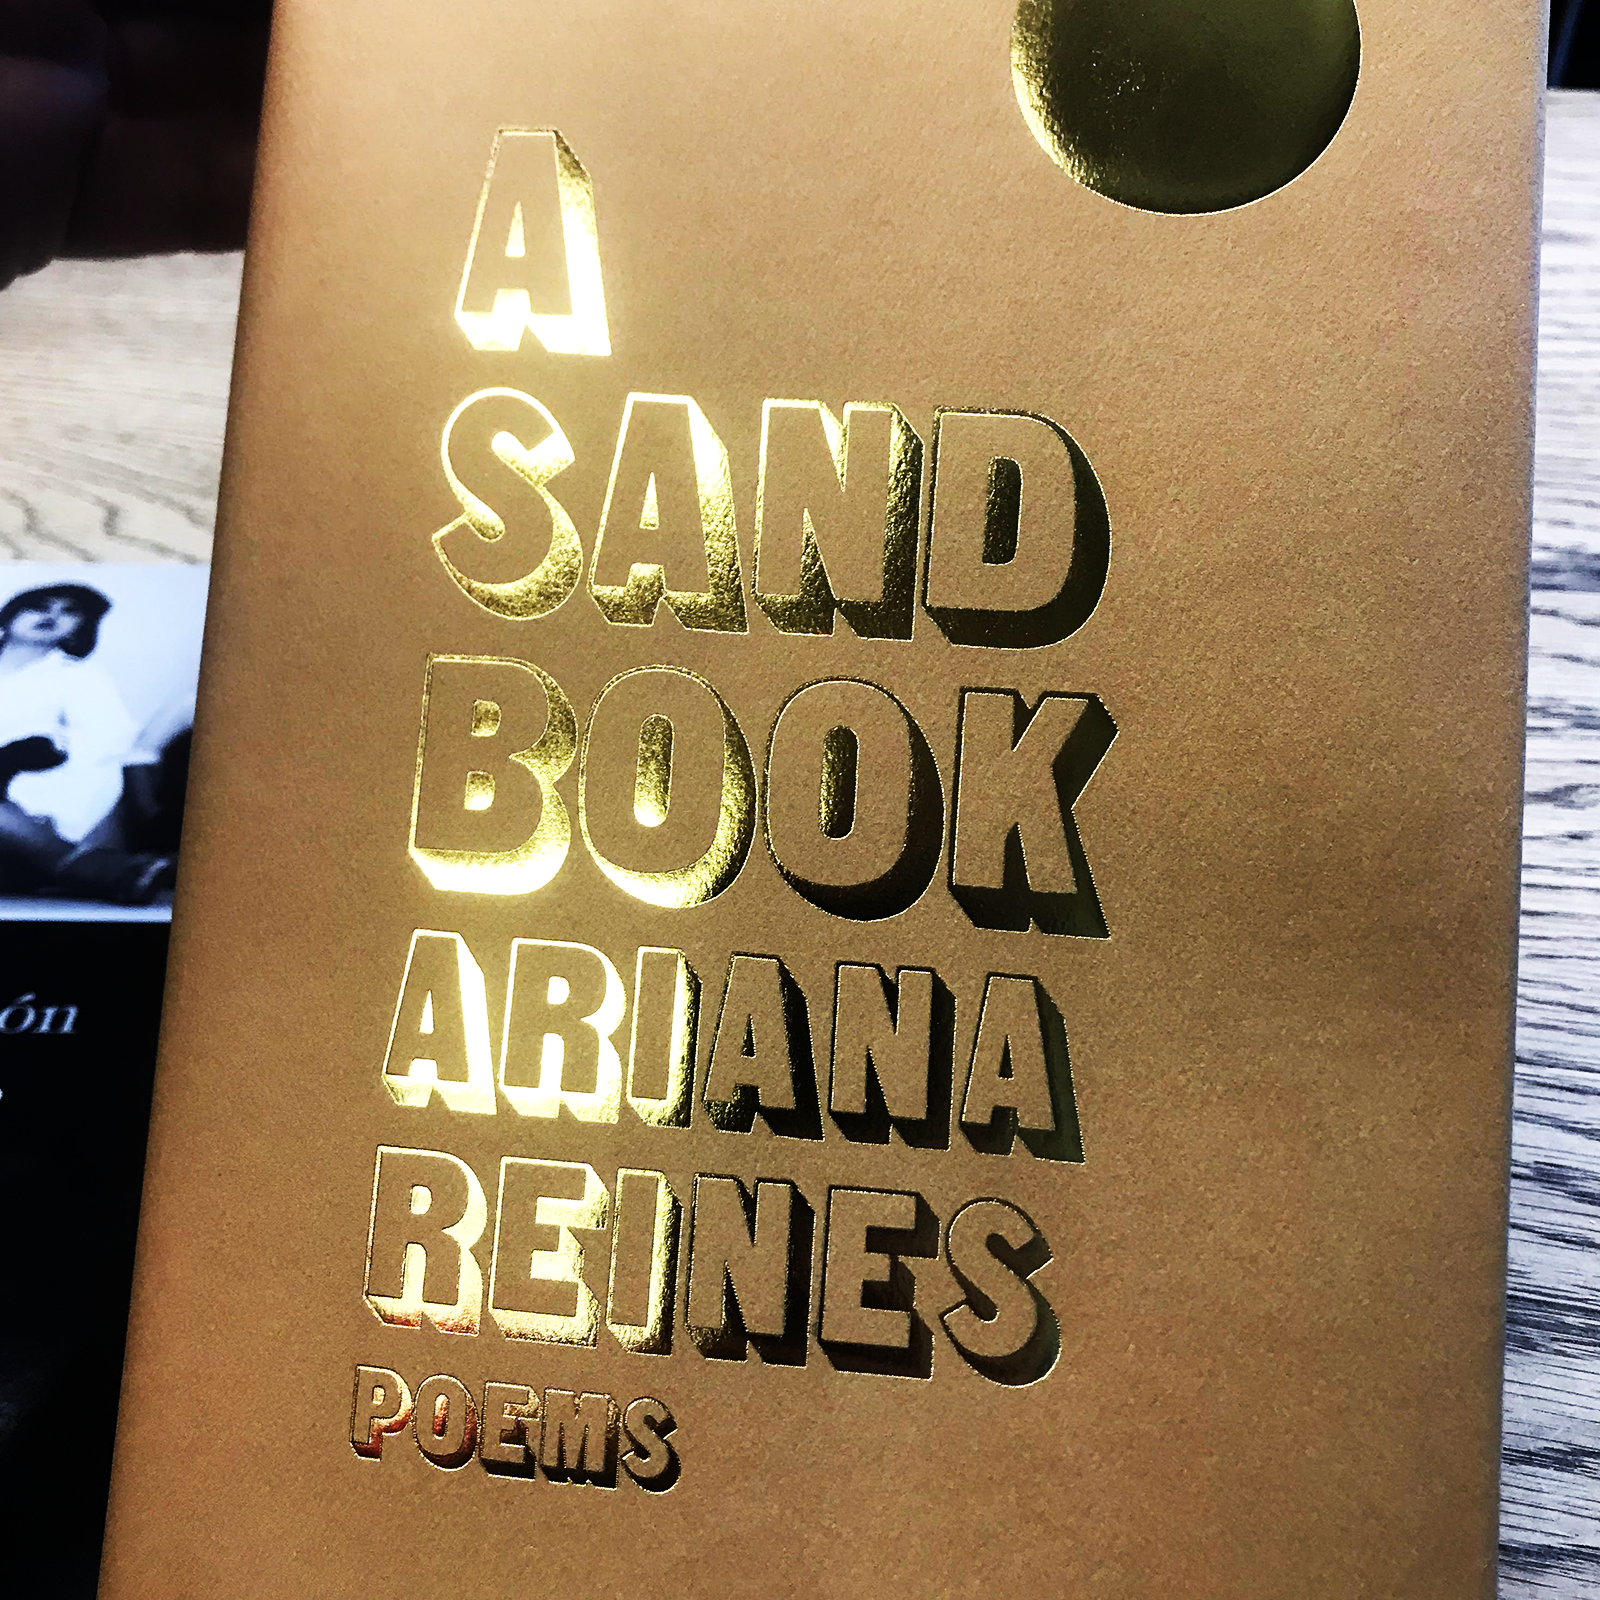 Poetry Review – A Sand Book Ariana Reines Poems 0/100